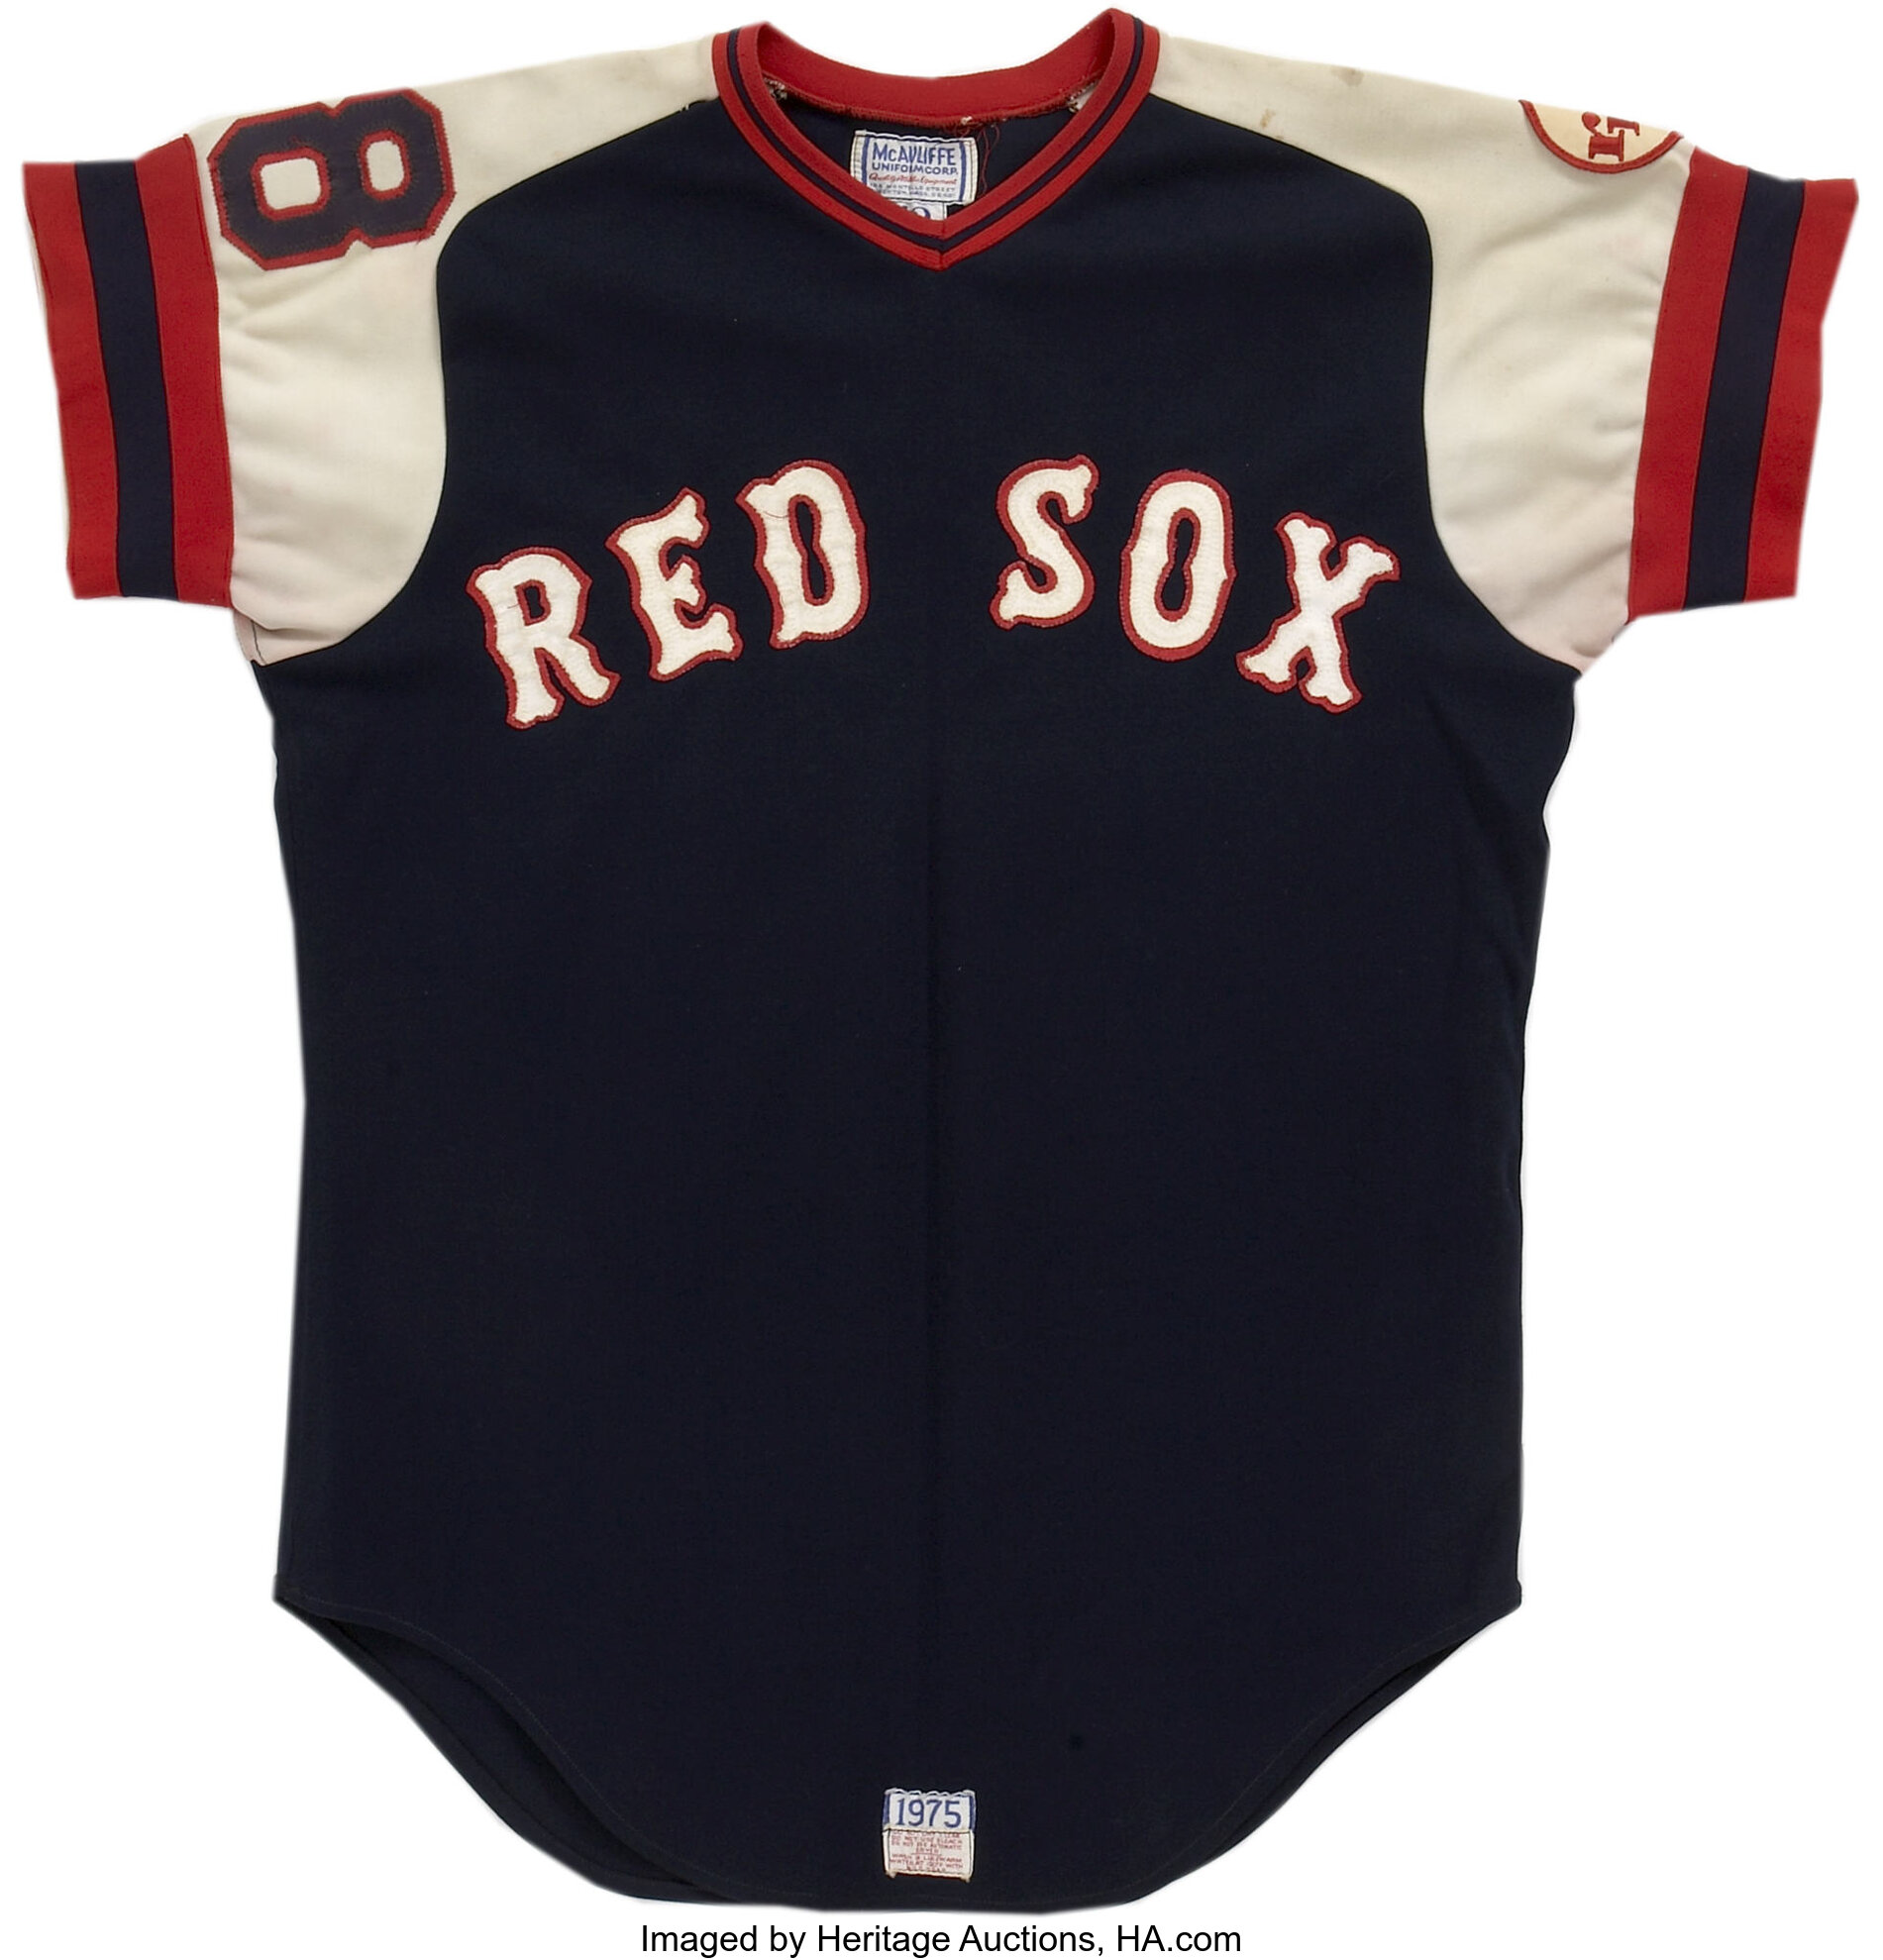 2020 Pawtucket Boston Red Sox #29 Game Issued Red Jersey Alternate